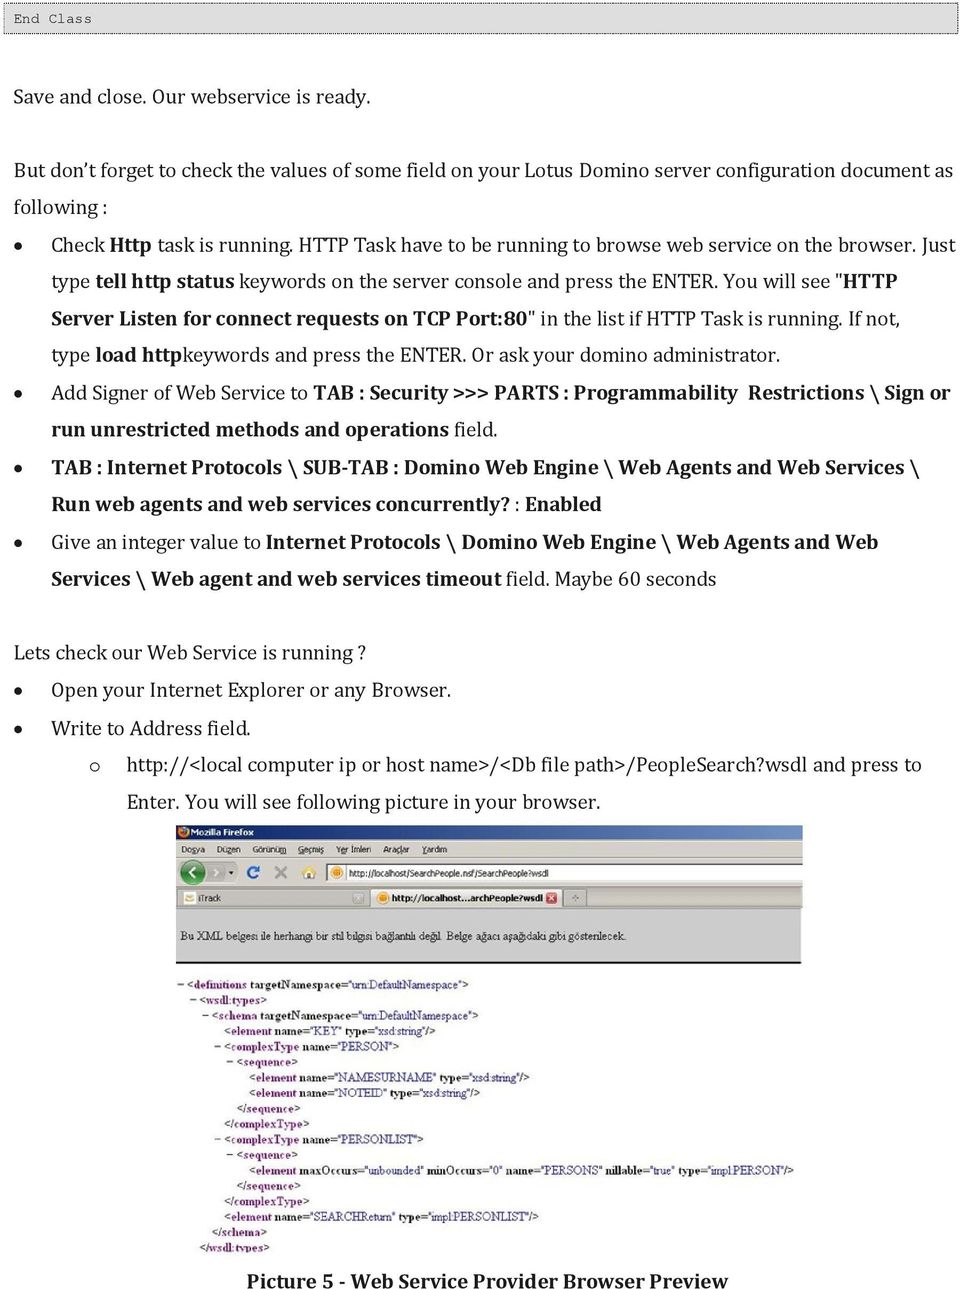 You will see "HTTP Server Listen for connect requests on TCP Port:80" in the list if HTTP Task is running. If not, type load httpkeywords and press the ENTER. Or ask your domino administrator.